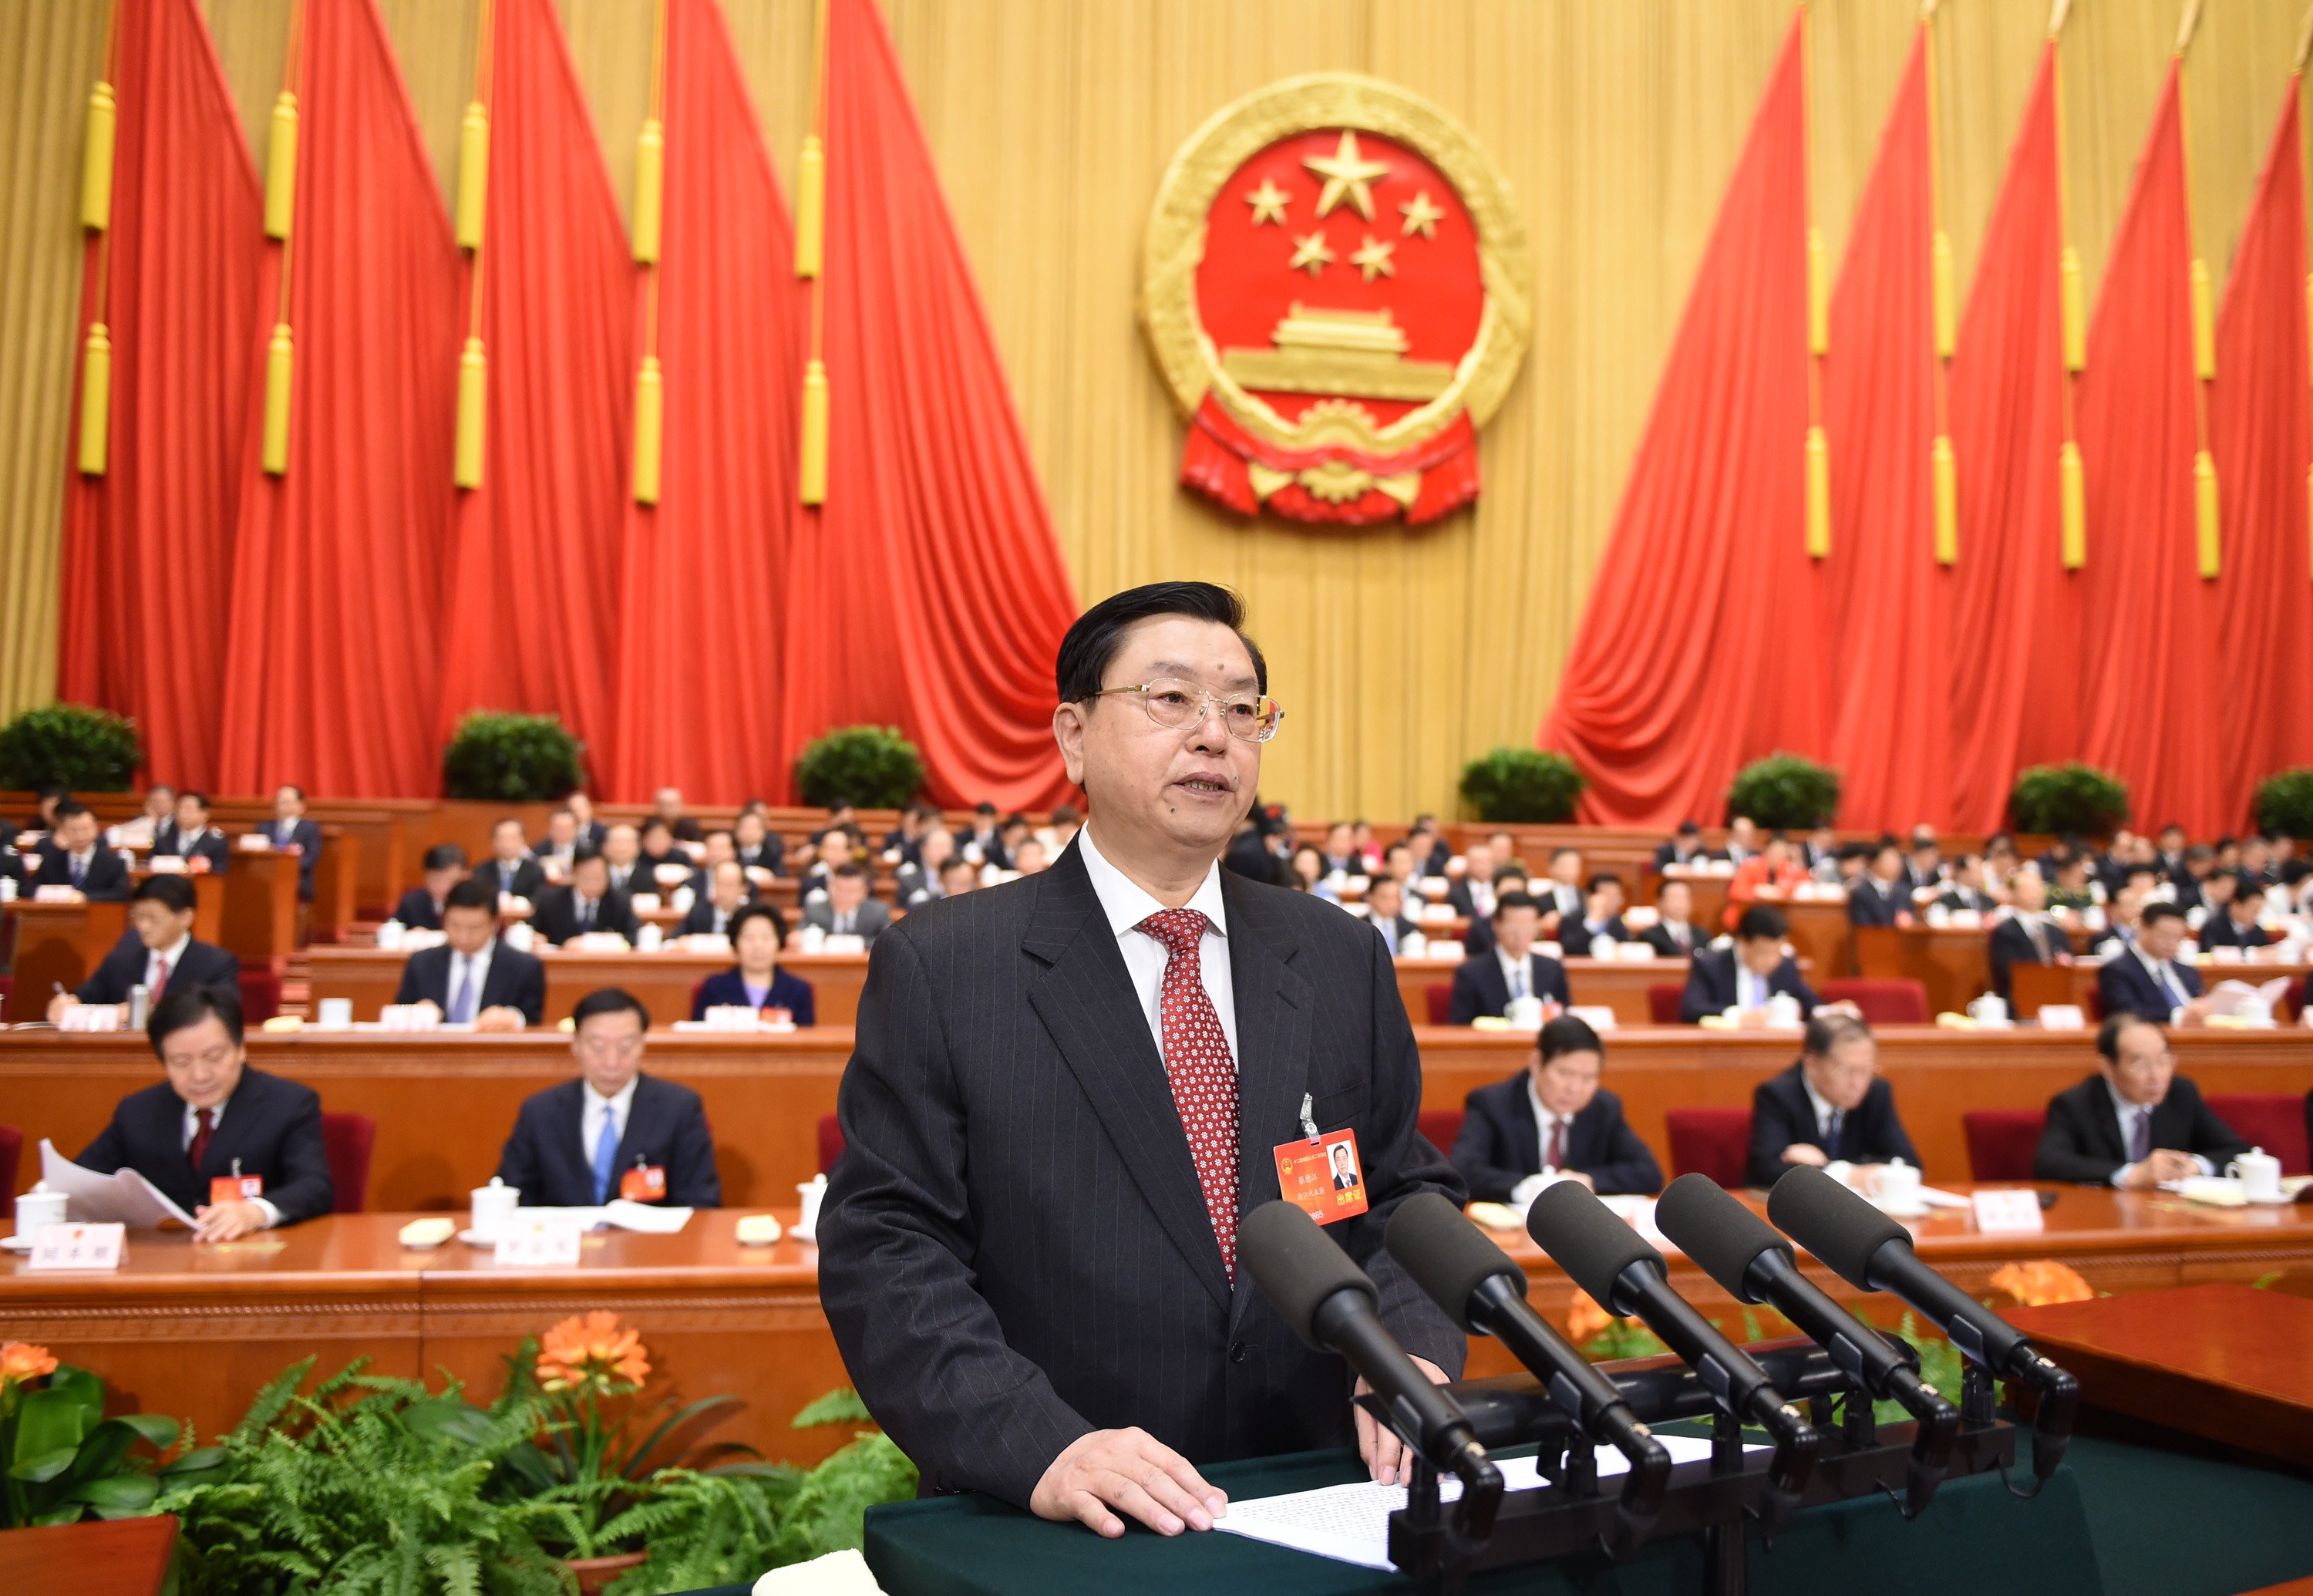 Zhang Dejiang, chairman of the National People's Congress, reportedly said political change in Hong Kong would still be possible after 2017. Photo: Xinhua